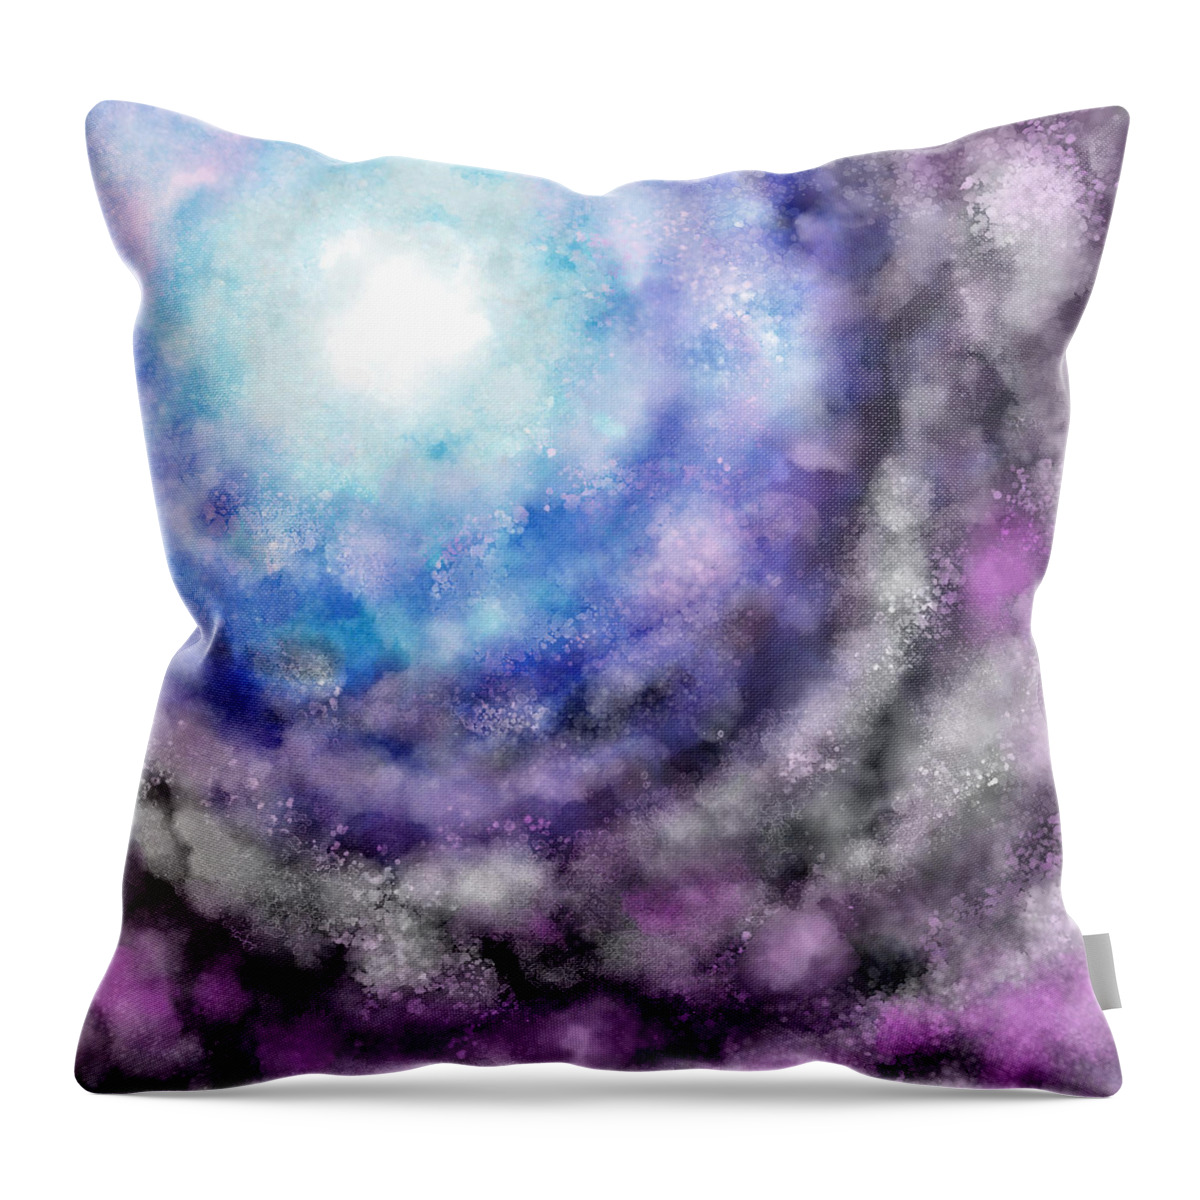 Digital Throw Pillow featuring the digital art Abstract 48 by Lucie Dumas